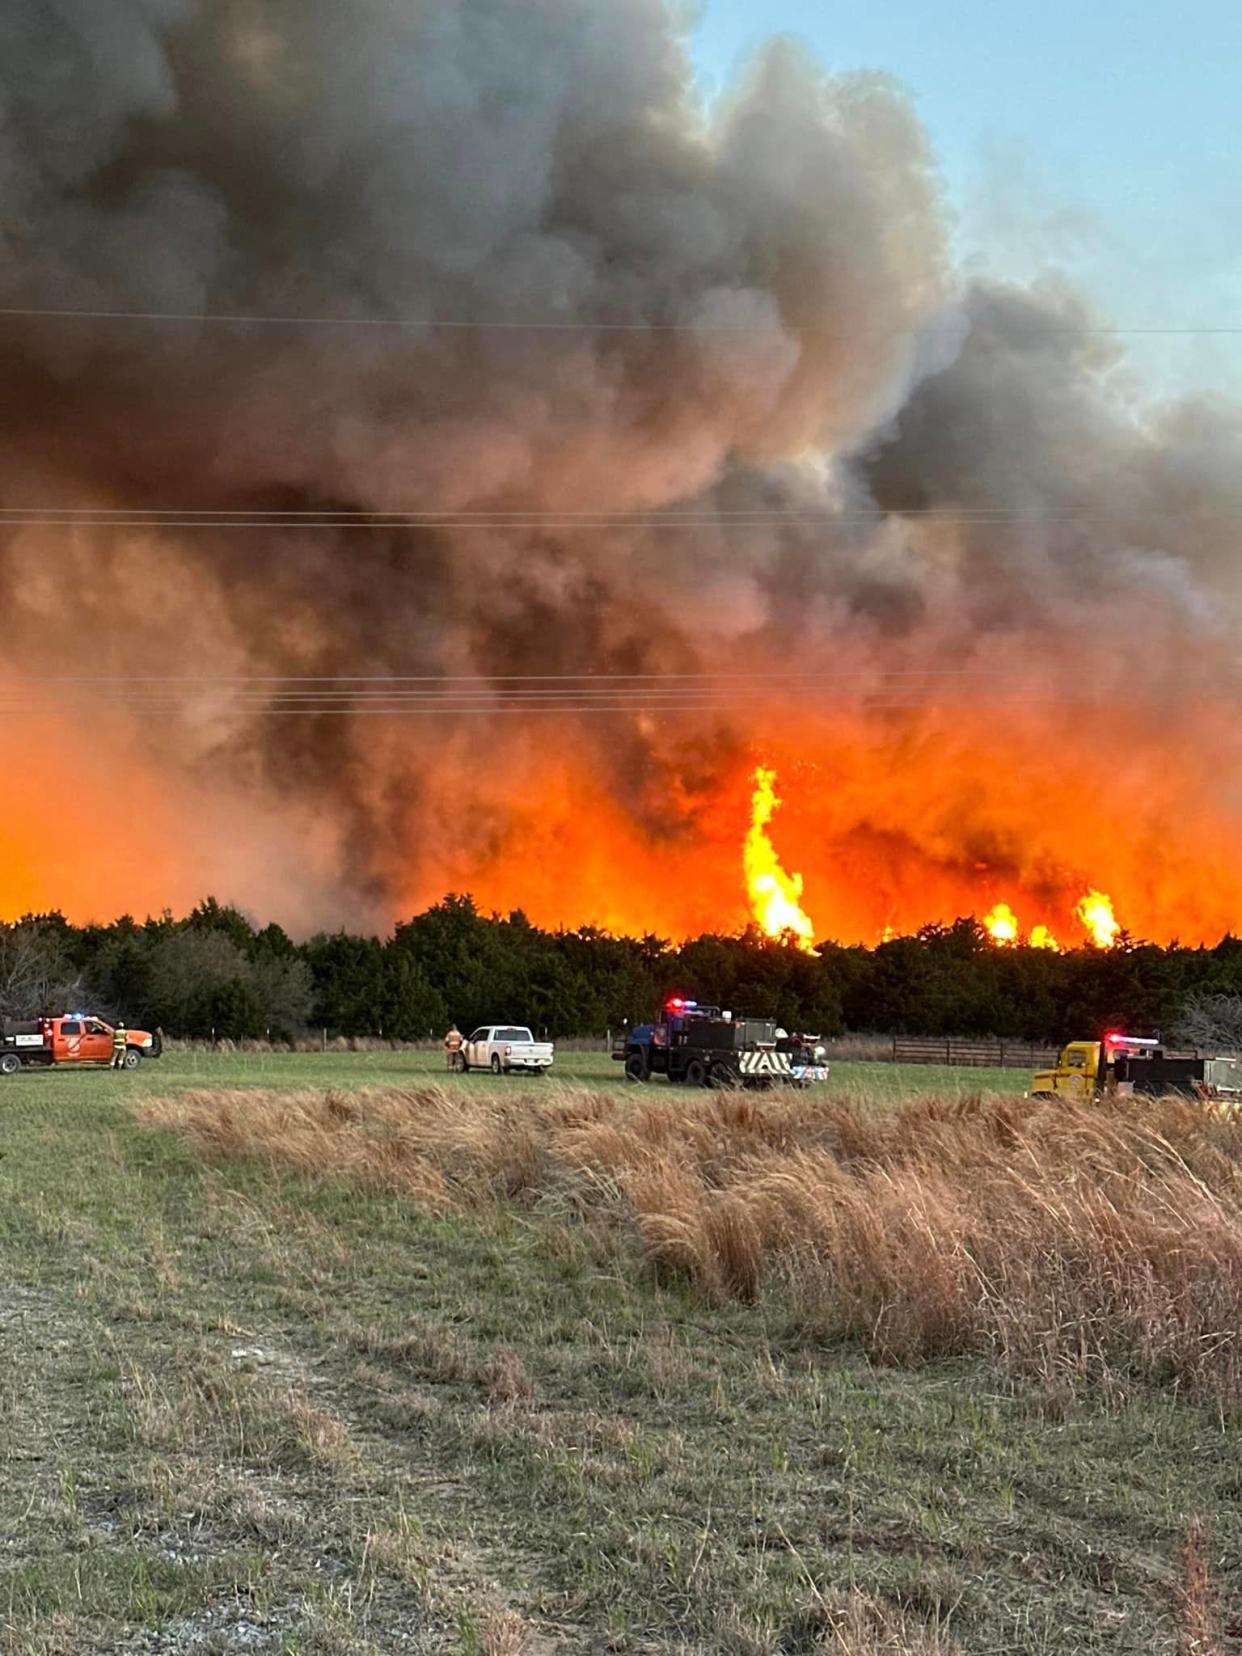 Firefighters from Vici and surrounding communities were called in Saturday to help fight a wildfire in Woodward County.